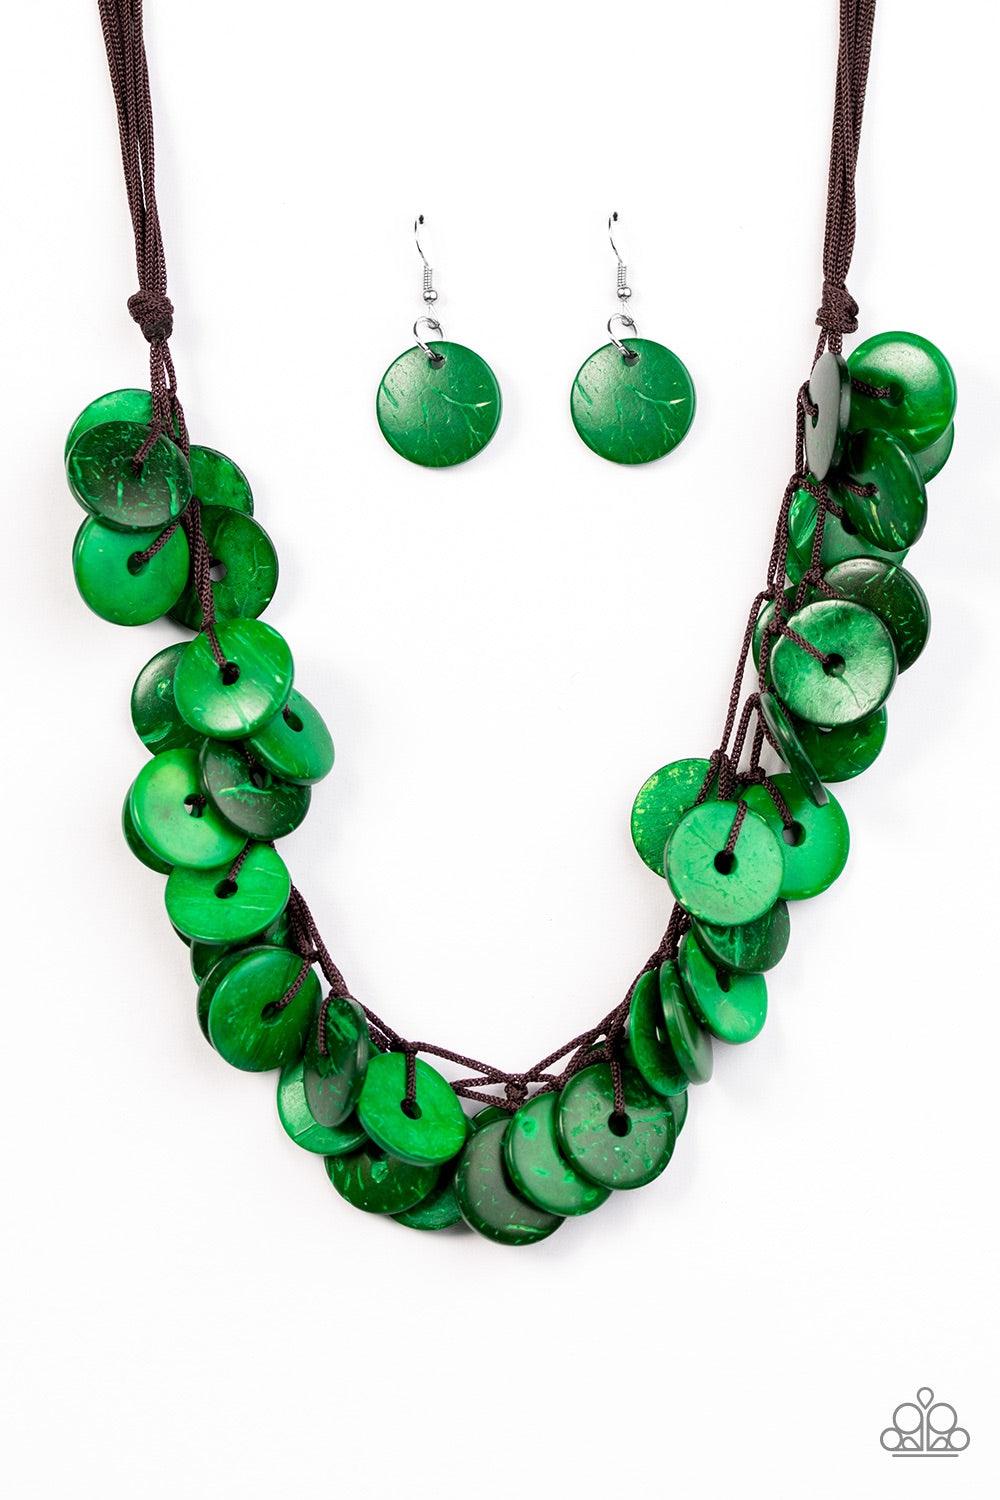 Paparazzi Accessories Jammin In Jamaica - Green Shiny wooden discs brushed in a refreshing green finish trickle along shiny brown cording, creating clustered layers below the collar. Features a button-loop closure. Jewelry